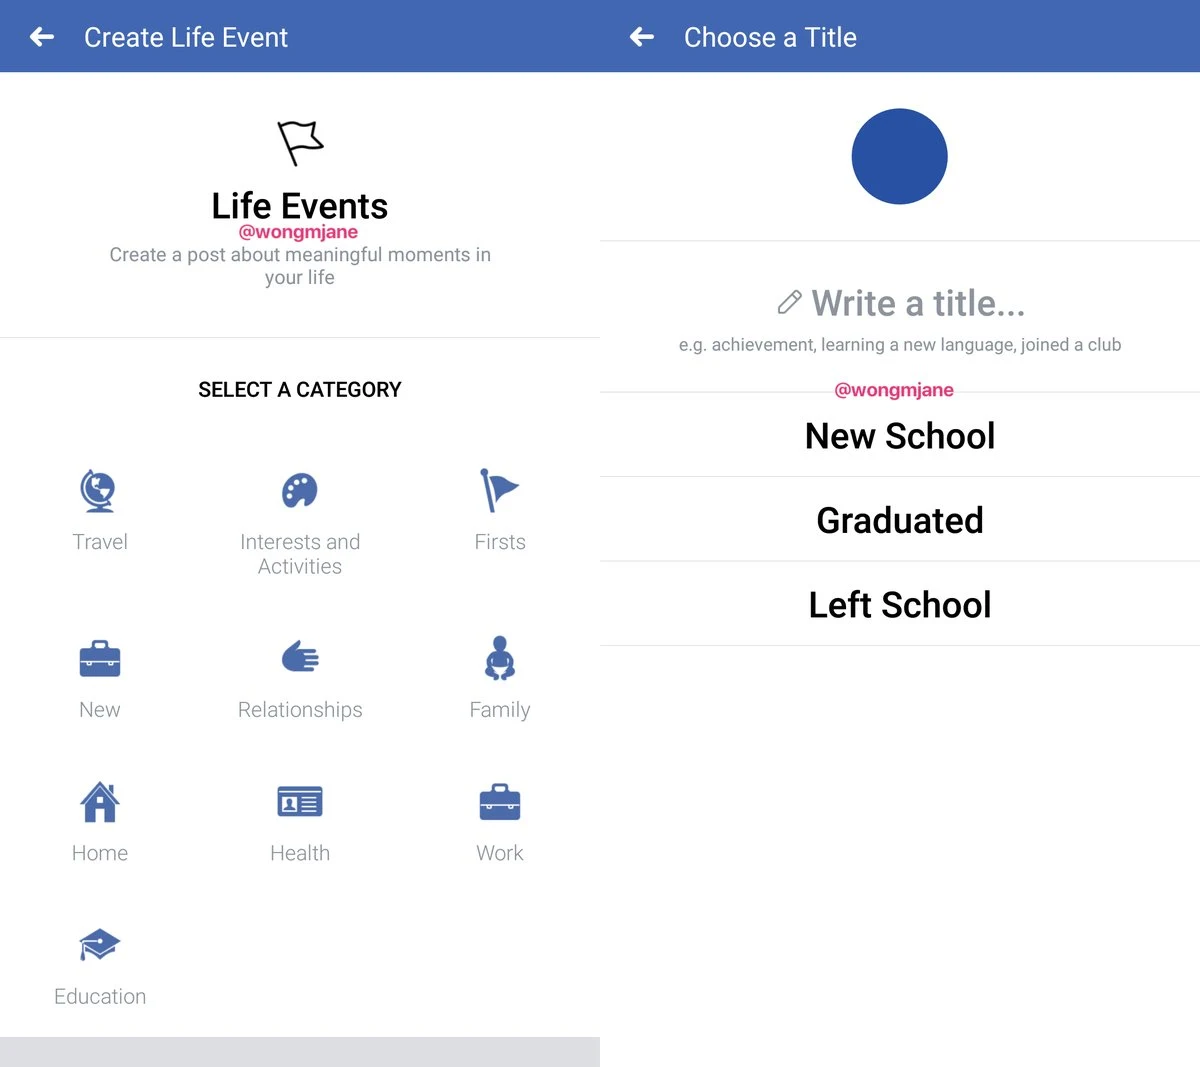 Facebook is Testing Some New Features for the Platform